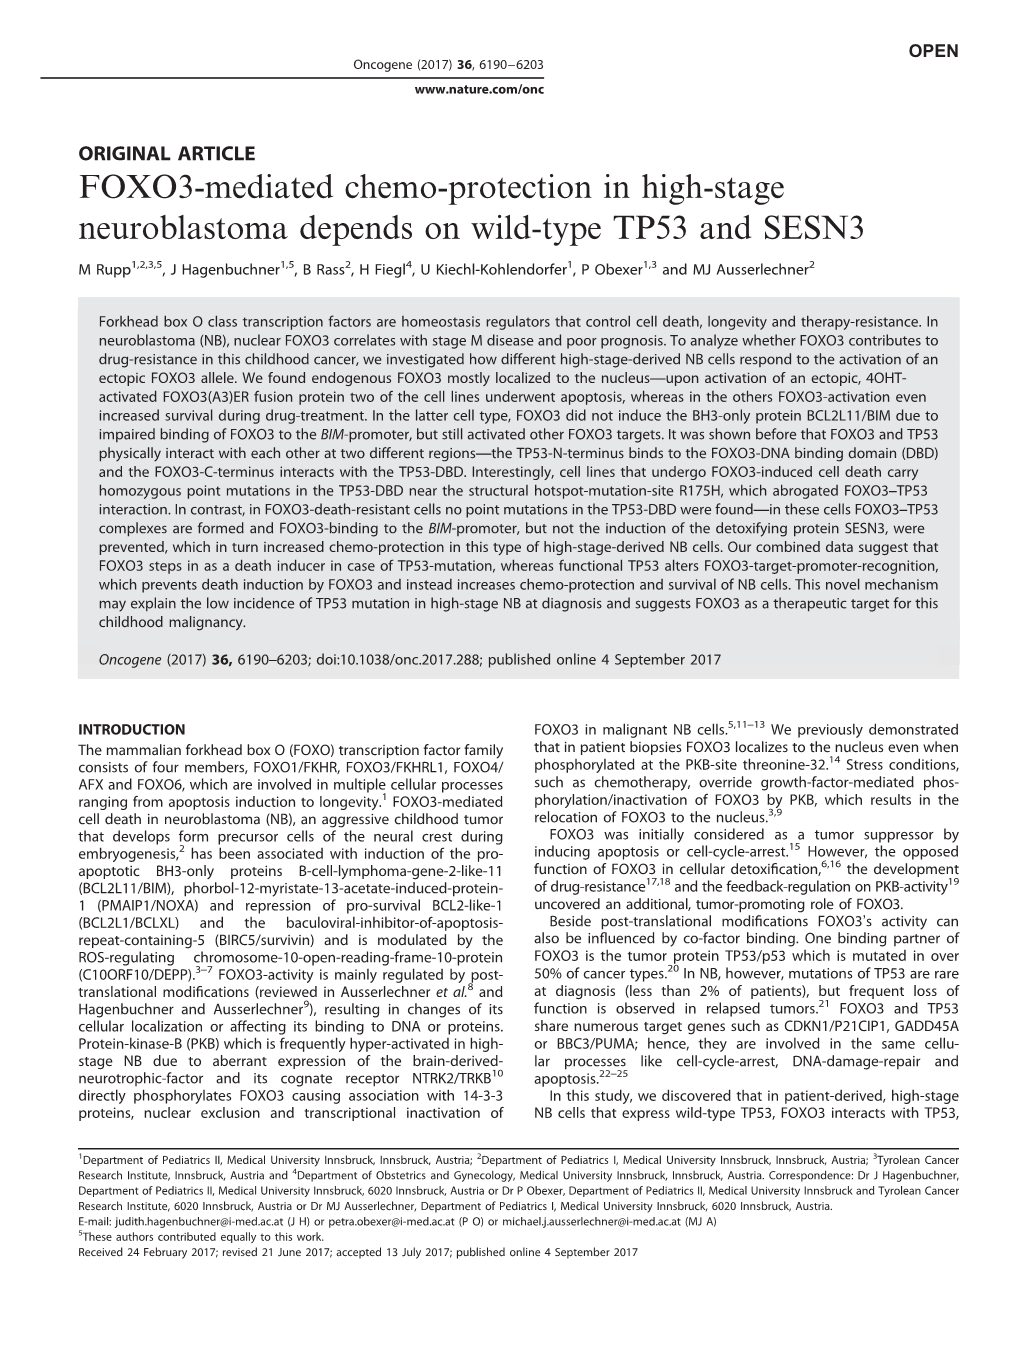 FOXO3-Mediated Chemo-Protection in High-Stage Neuroblastoma Depends on Wild-Type TP53 and SESN3